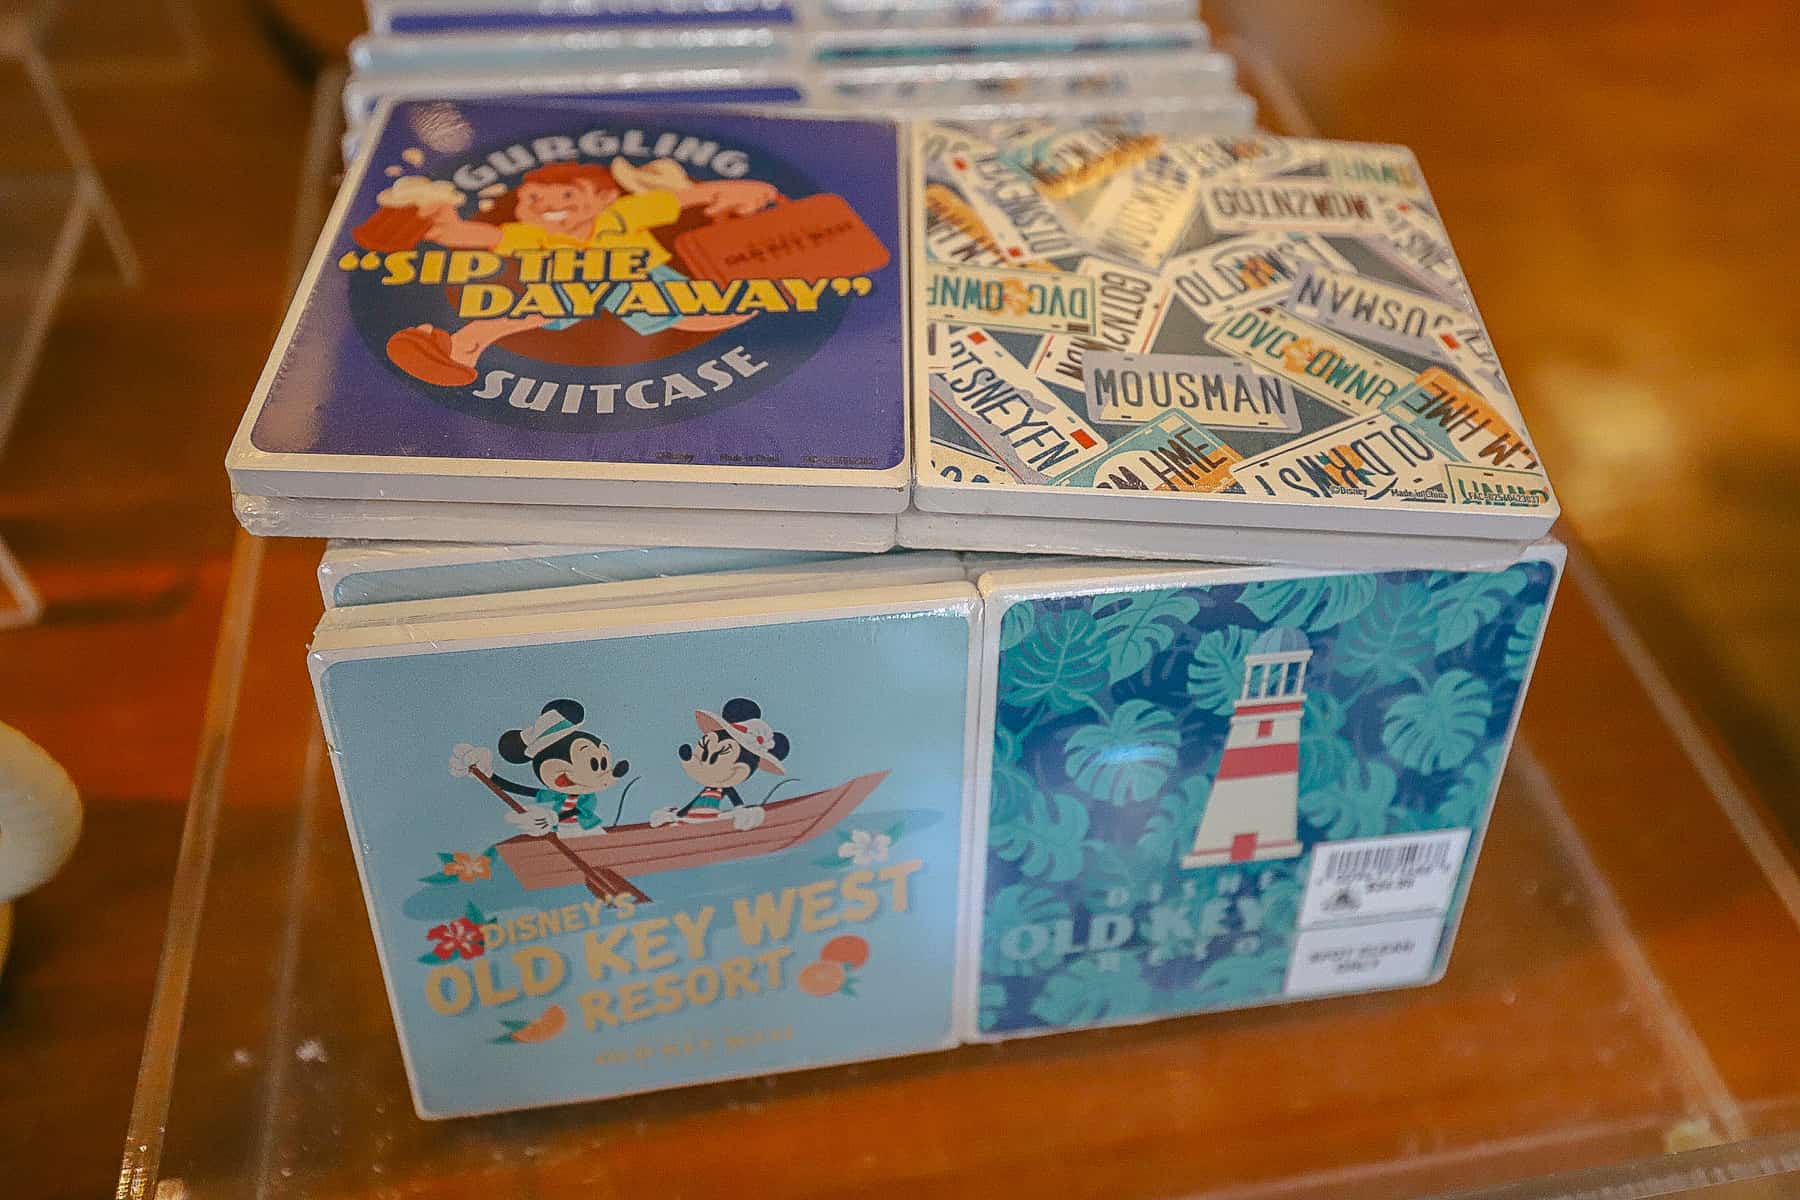 coaster set from Old Key West 